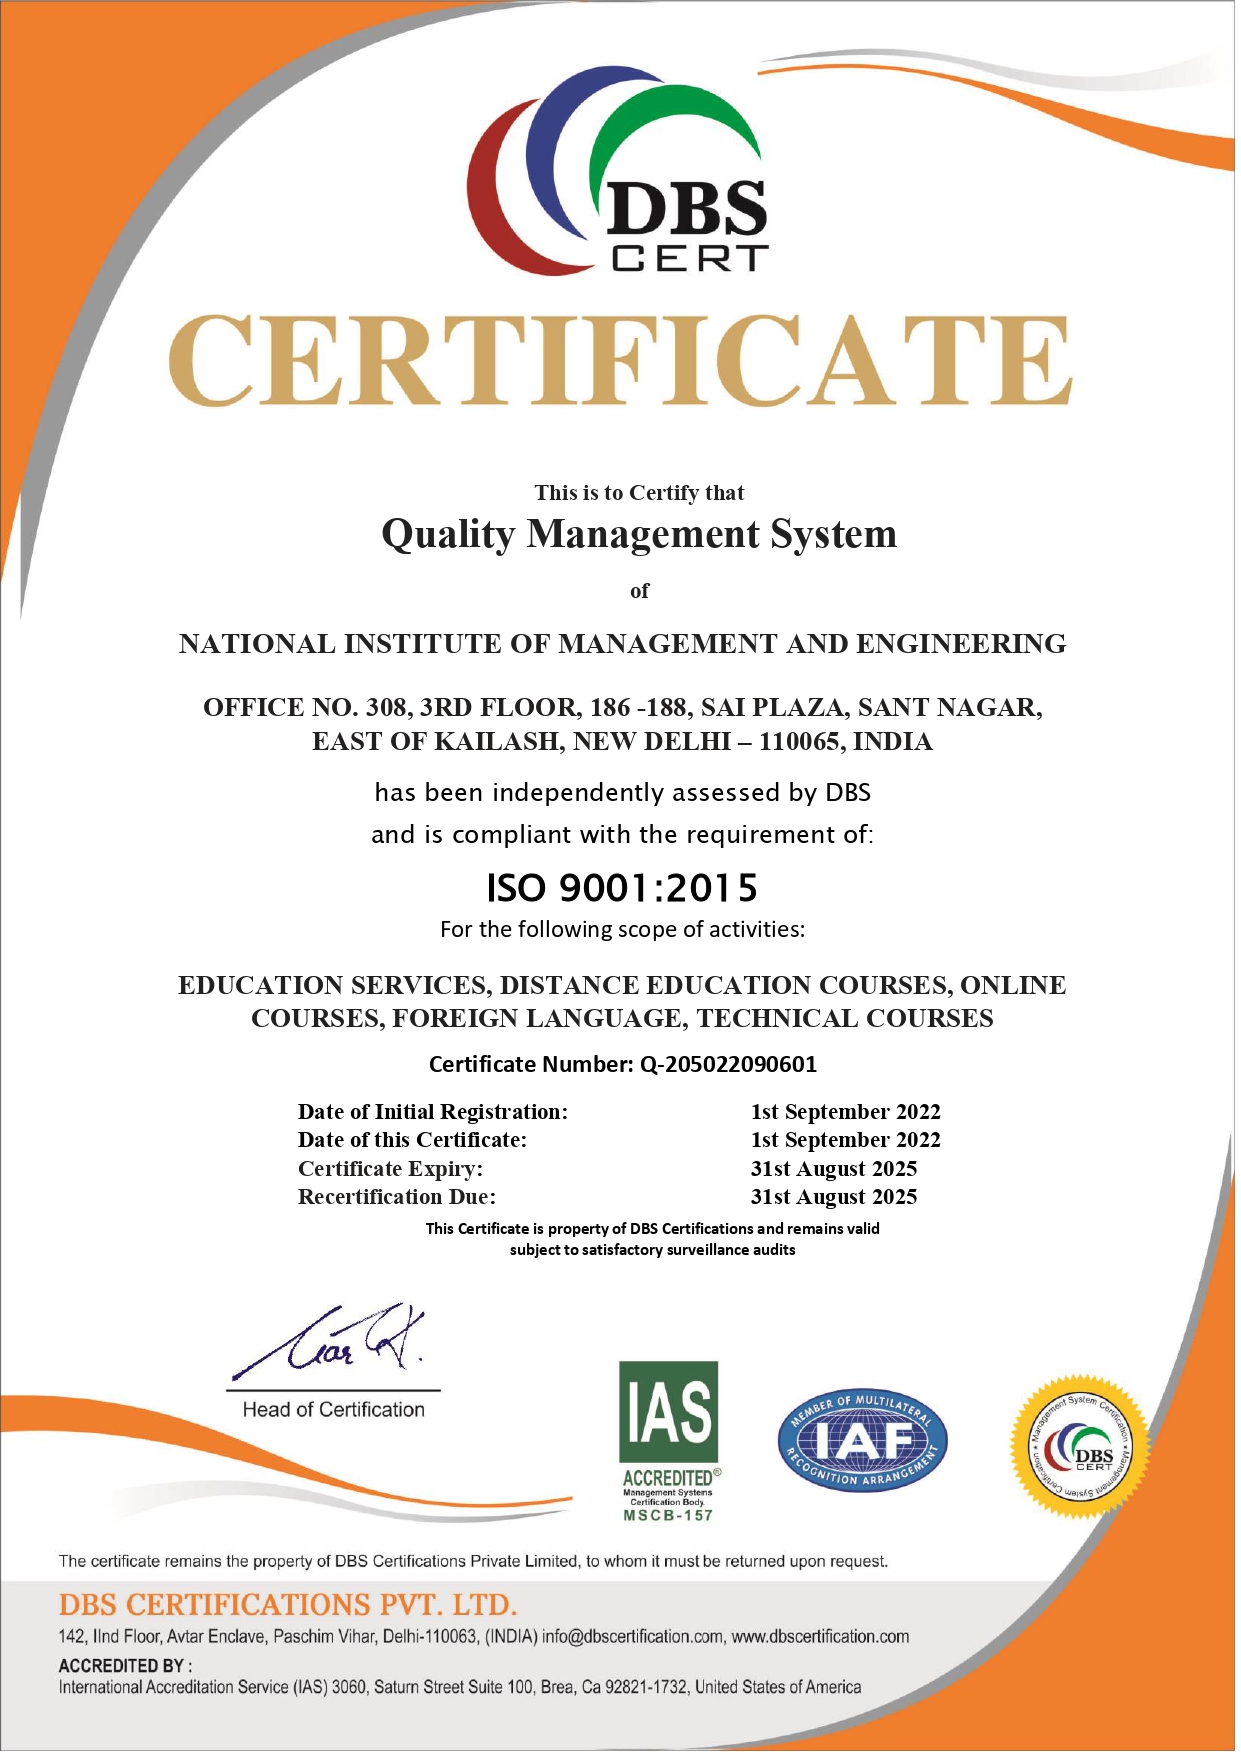 national institute of management and engineering - iso 9001-2015 dbs ias for 3 years_page-1sep2022